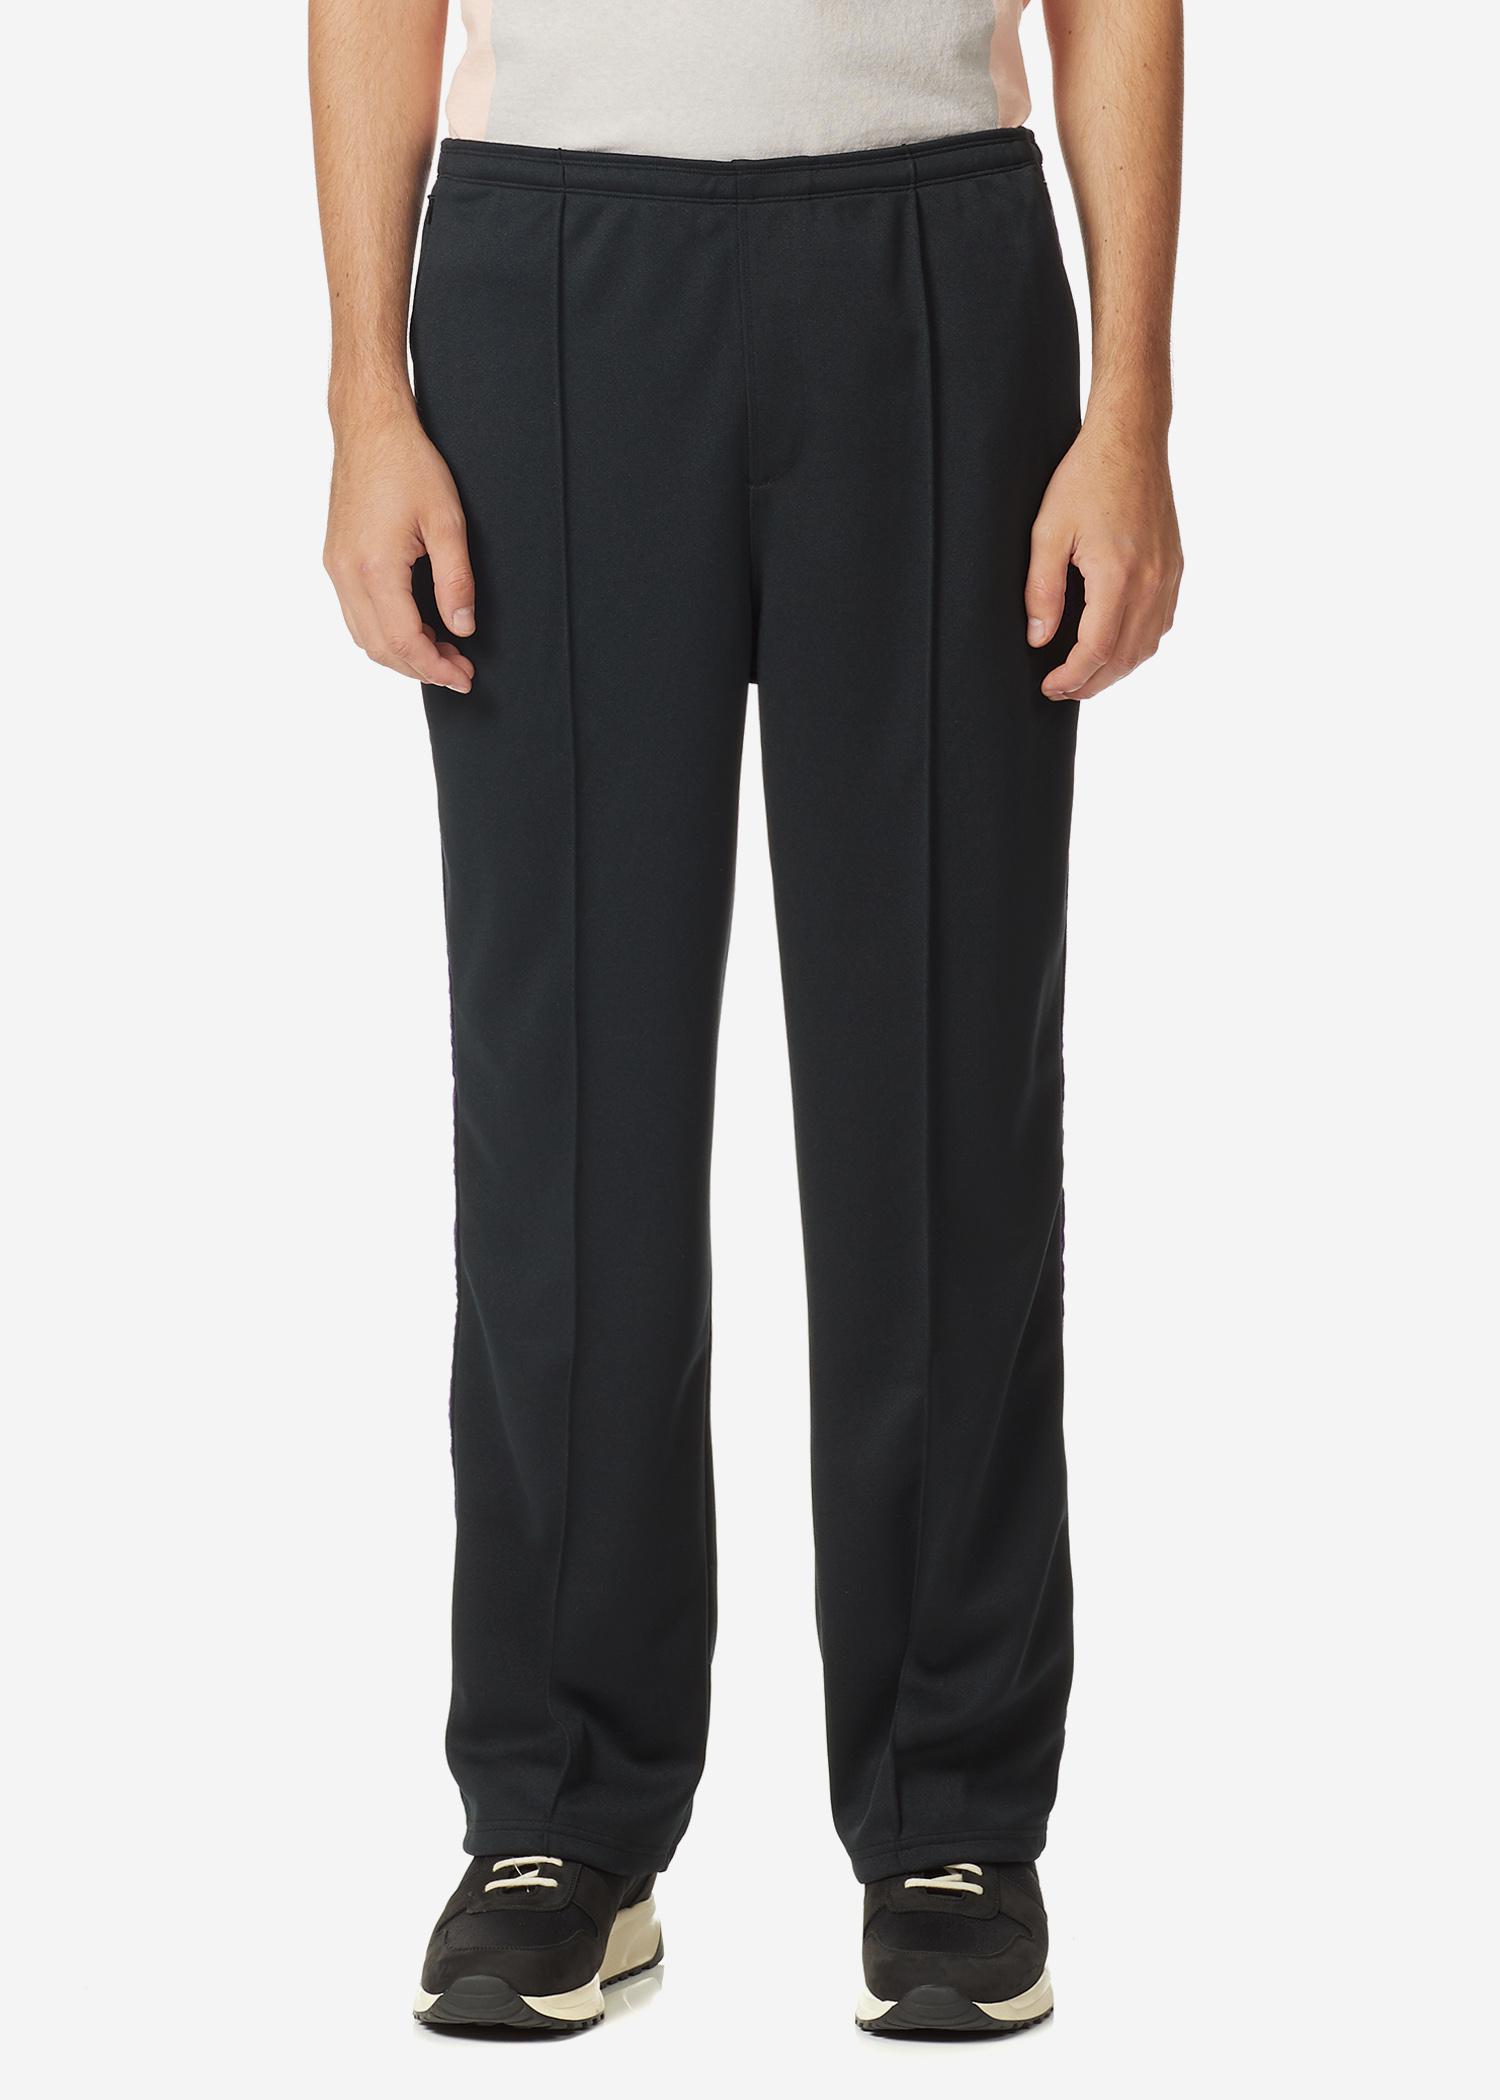 pants with line on side